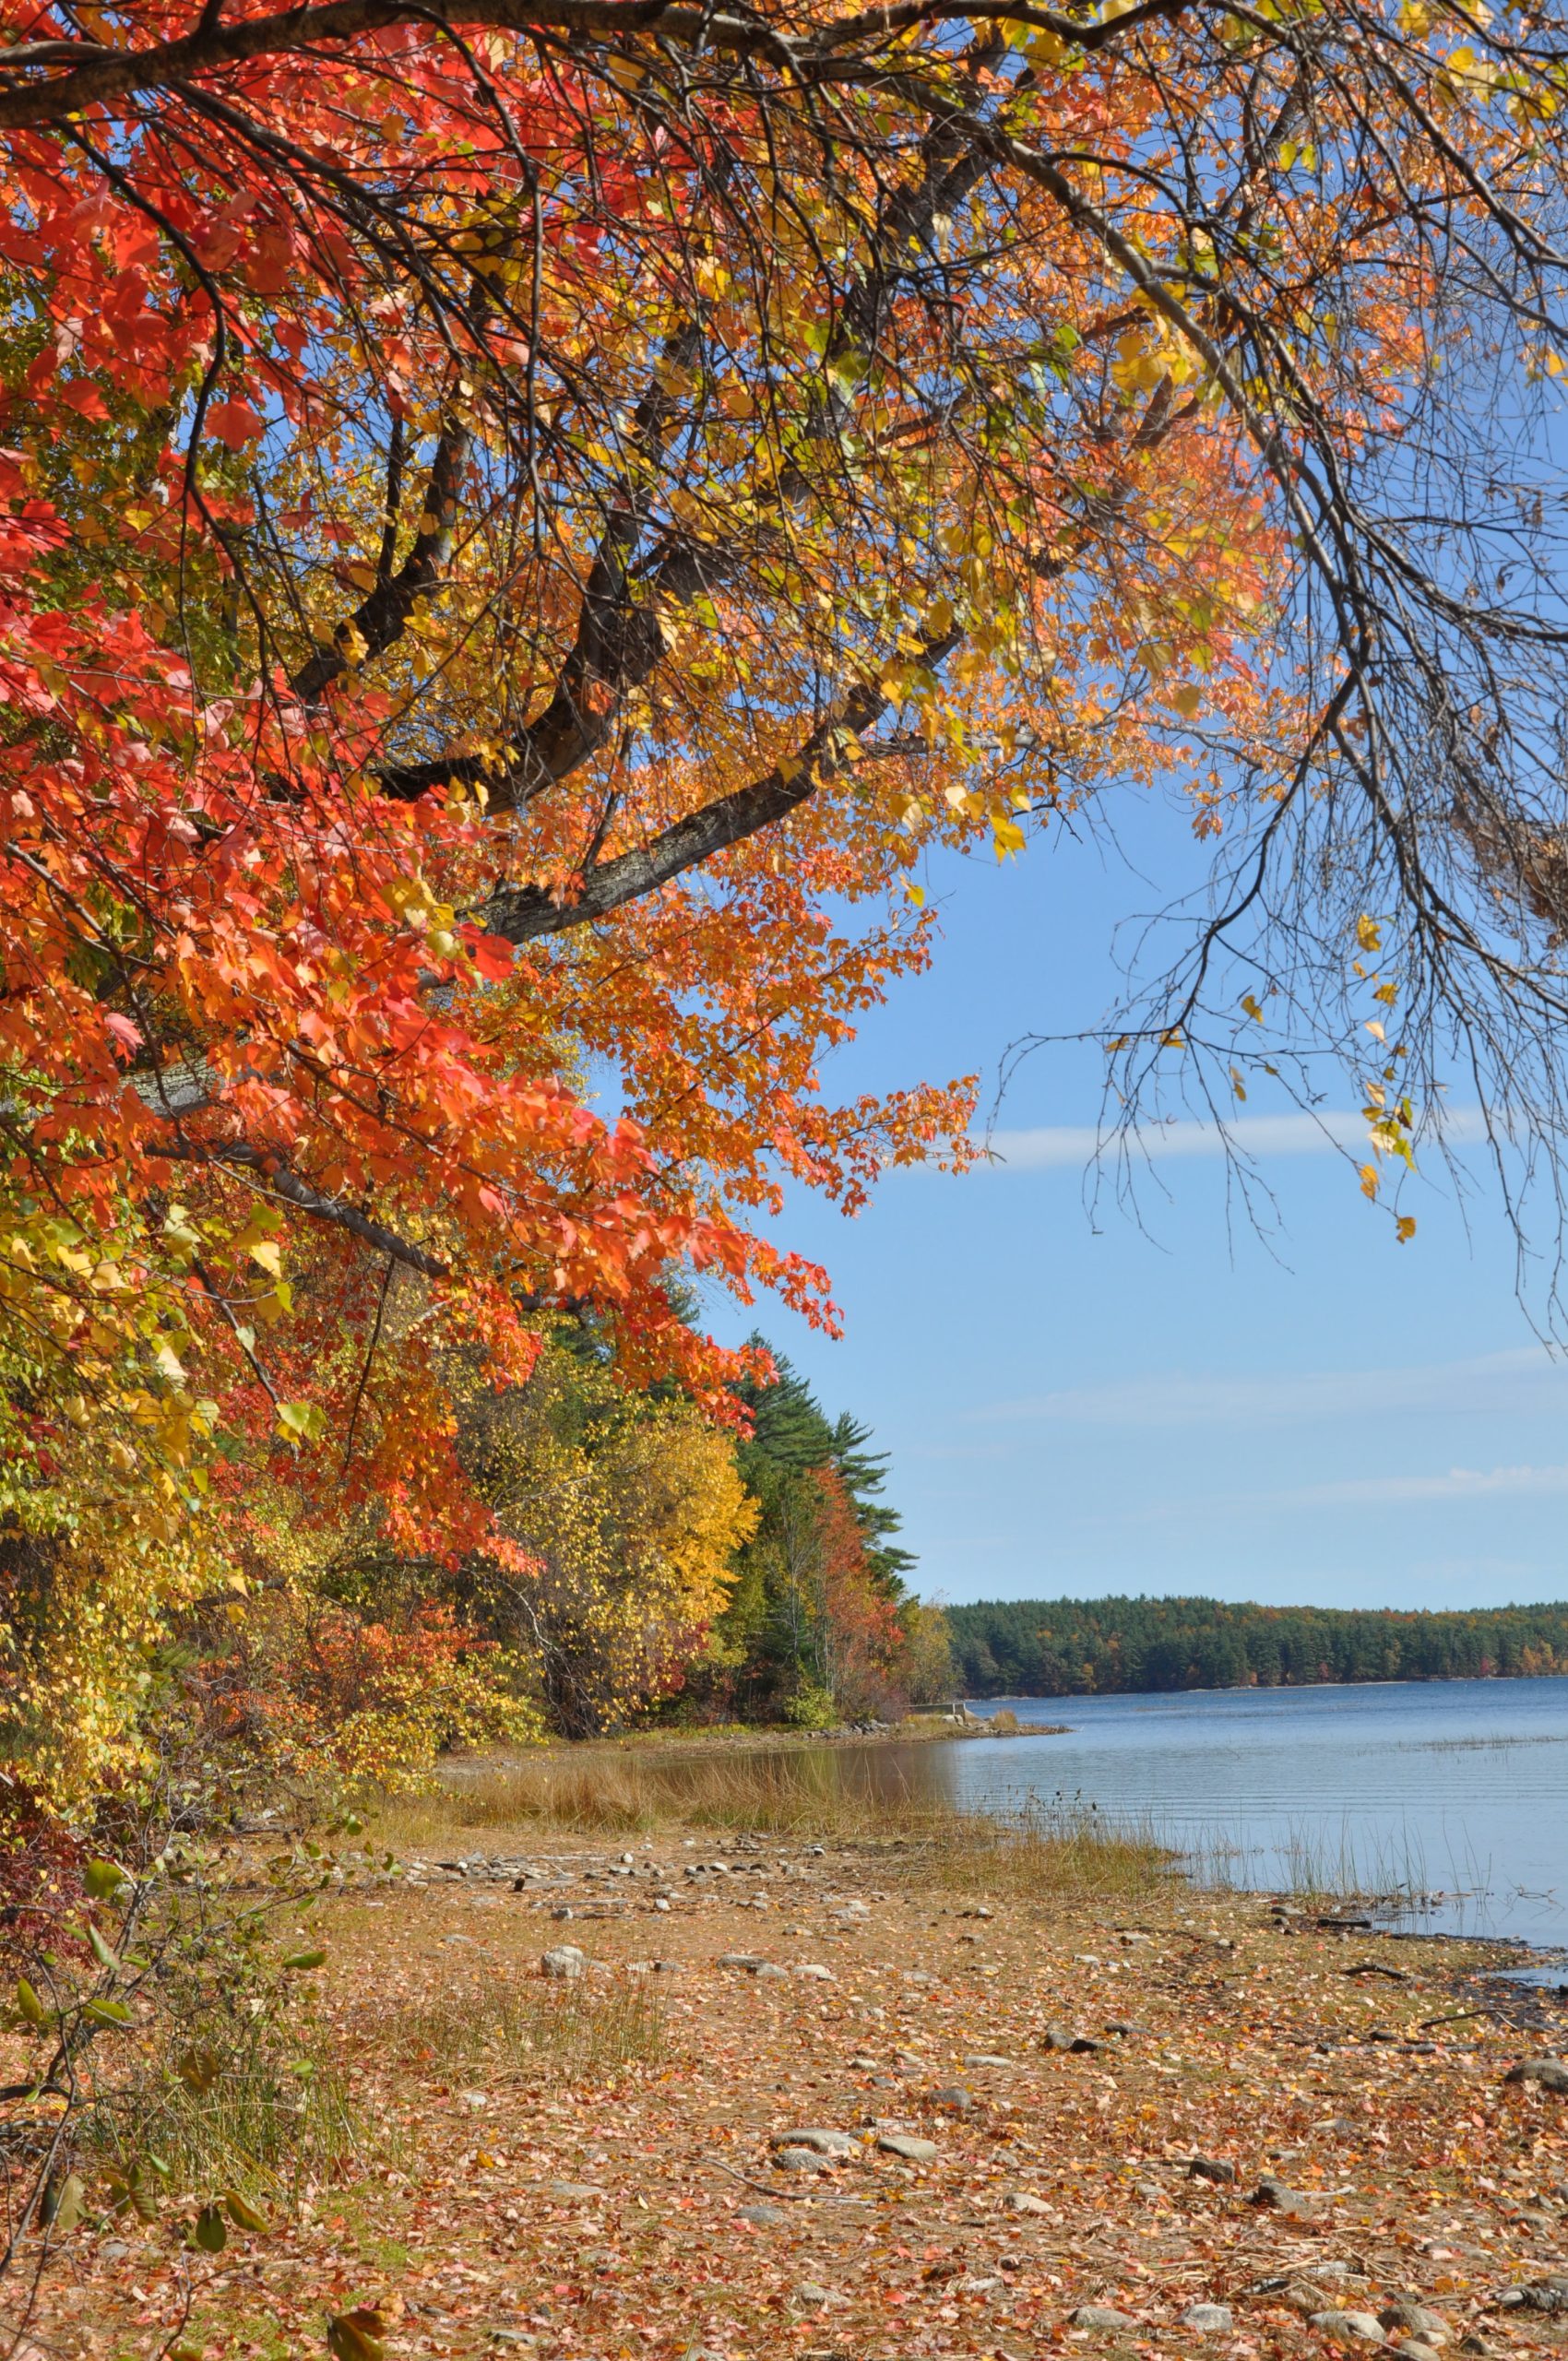 Shimmering Leaves On The Shore Of Massabesic Lake (user submitted)